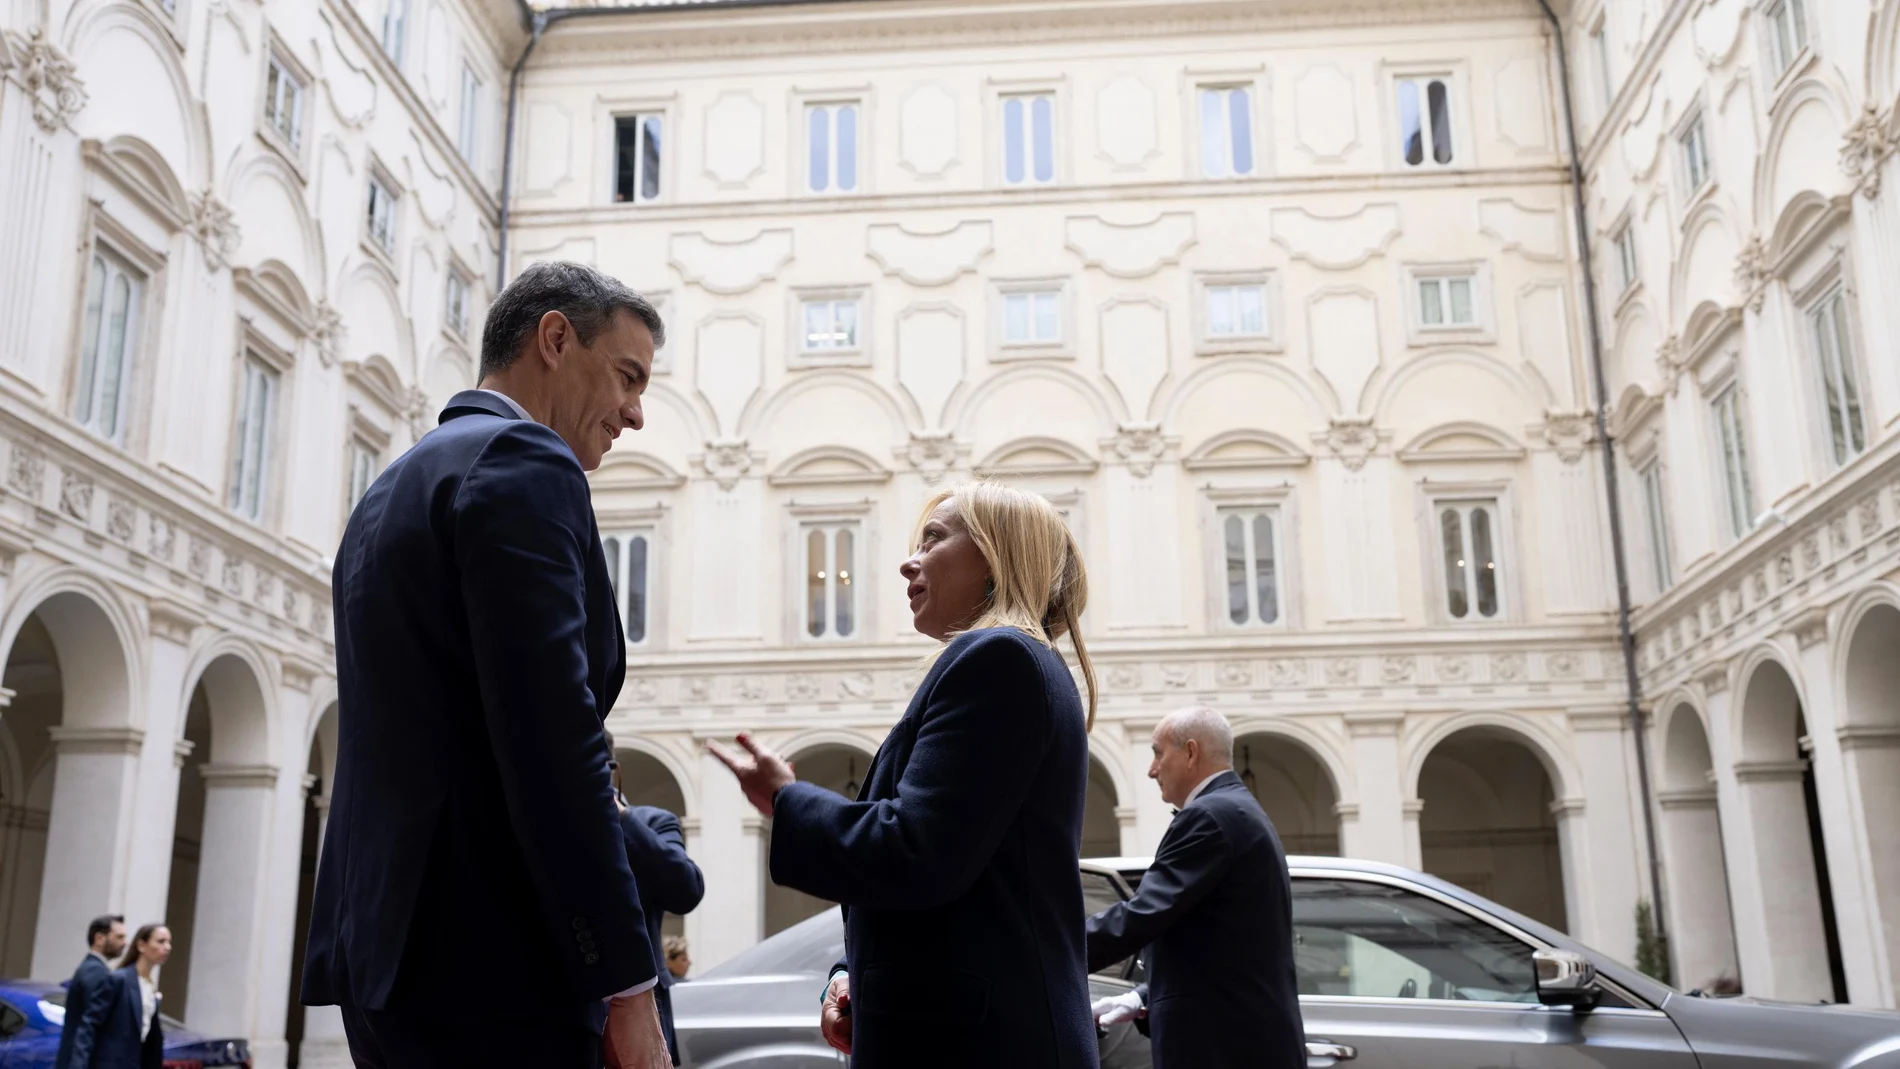  A handout picture made available by the Chigi Palace (Palazzo Chigi) Press Office shows Spanish Prime Minister Pedro Sanchez (L) and Italian Prime Minister Giorgia Meloni (R) in Rome, Italy, 05 April 2023.